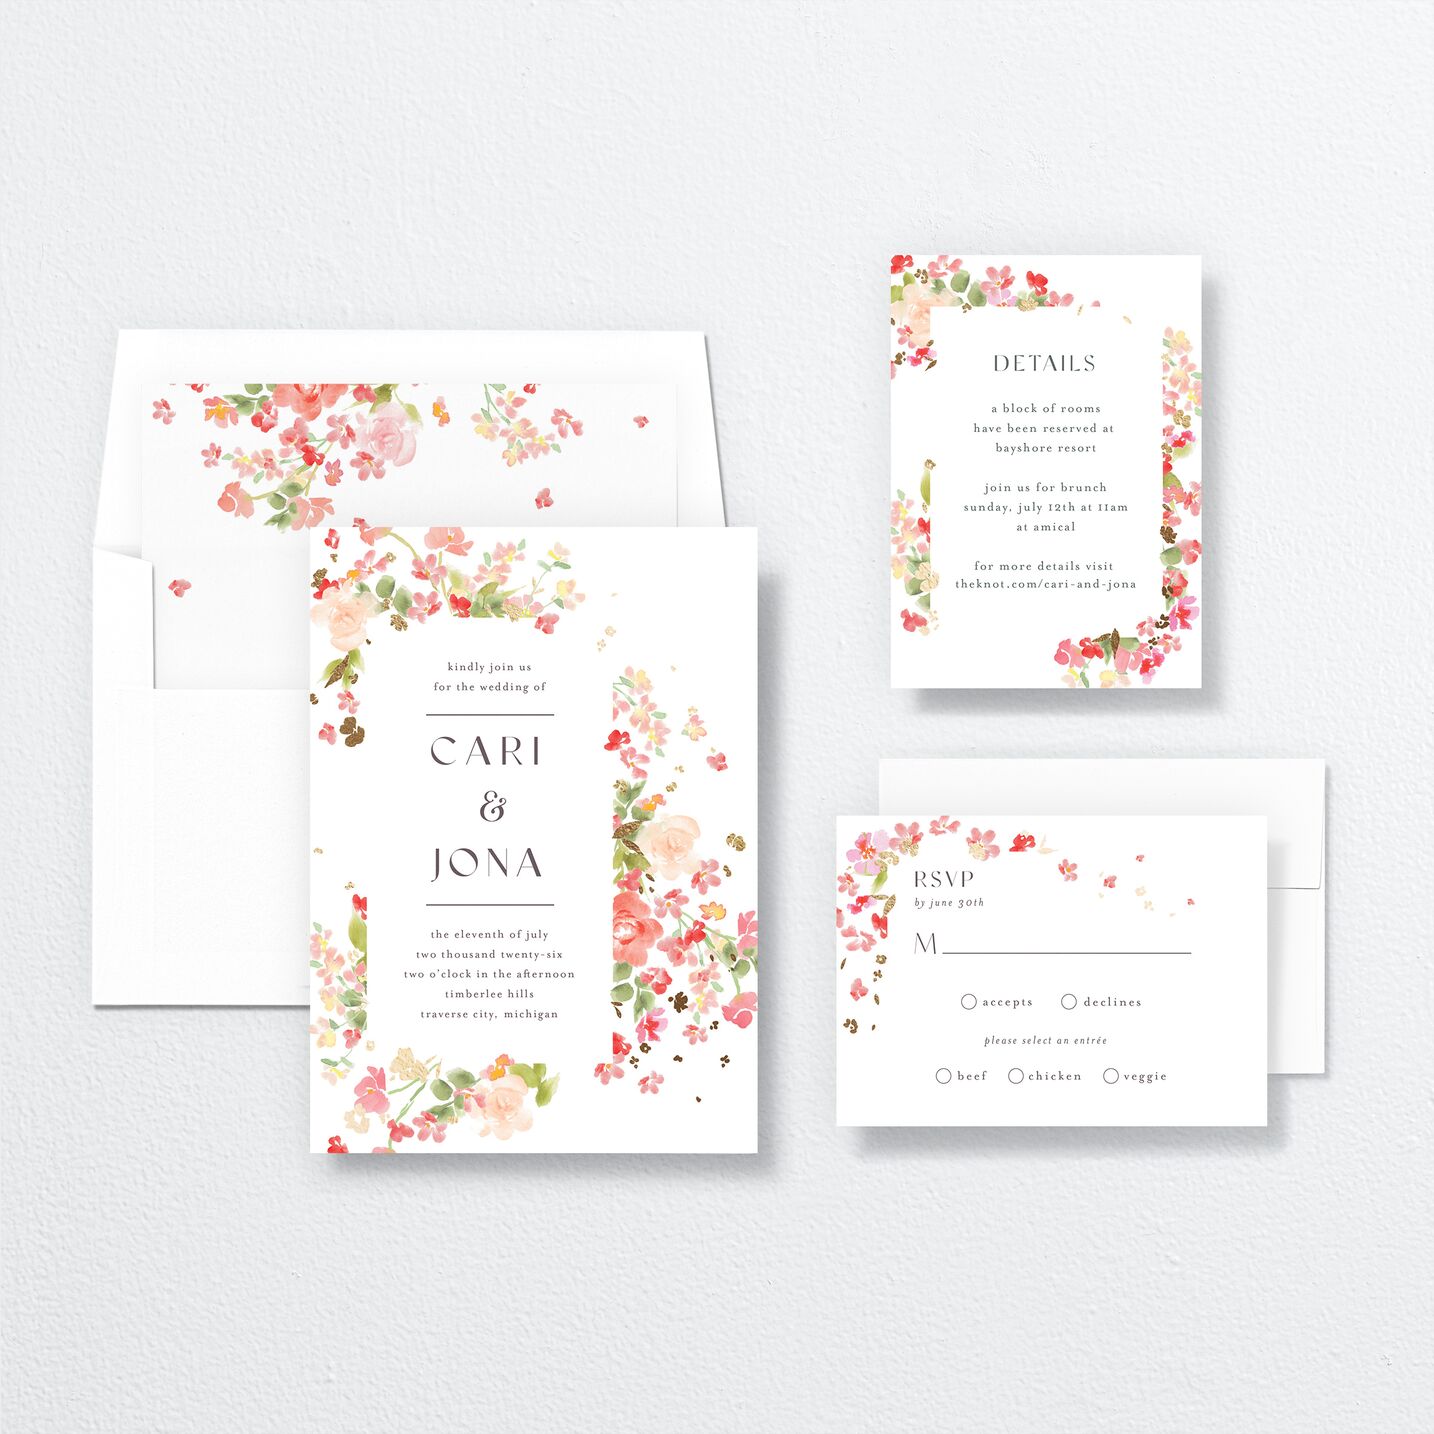 Scattered Blossoms Wedding Invitations suite in pink